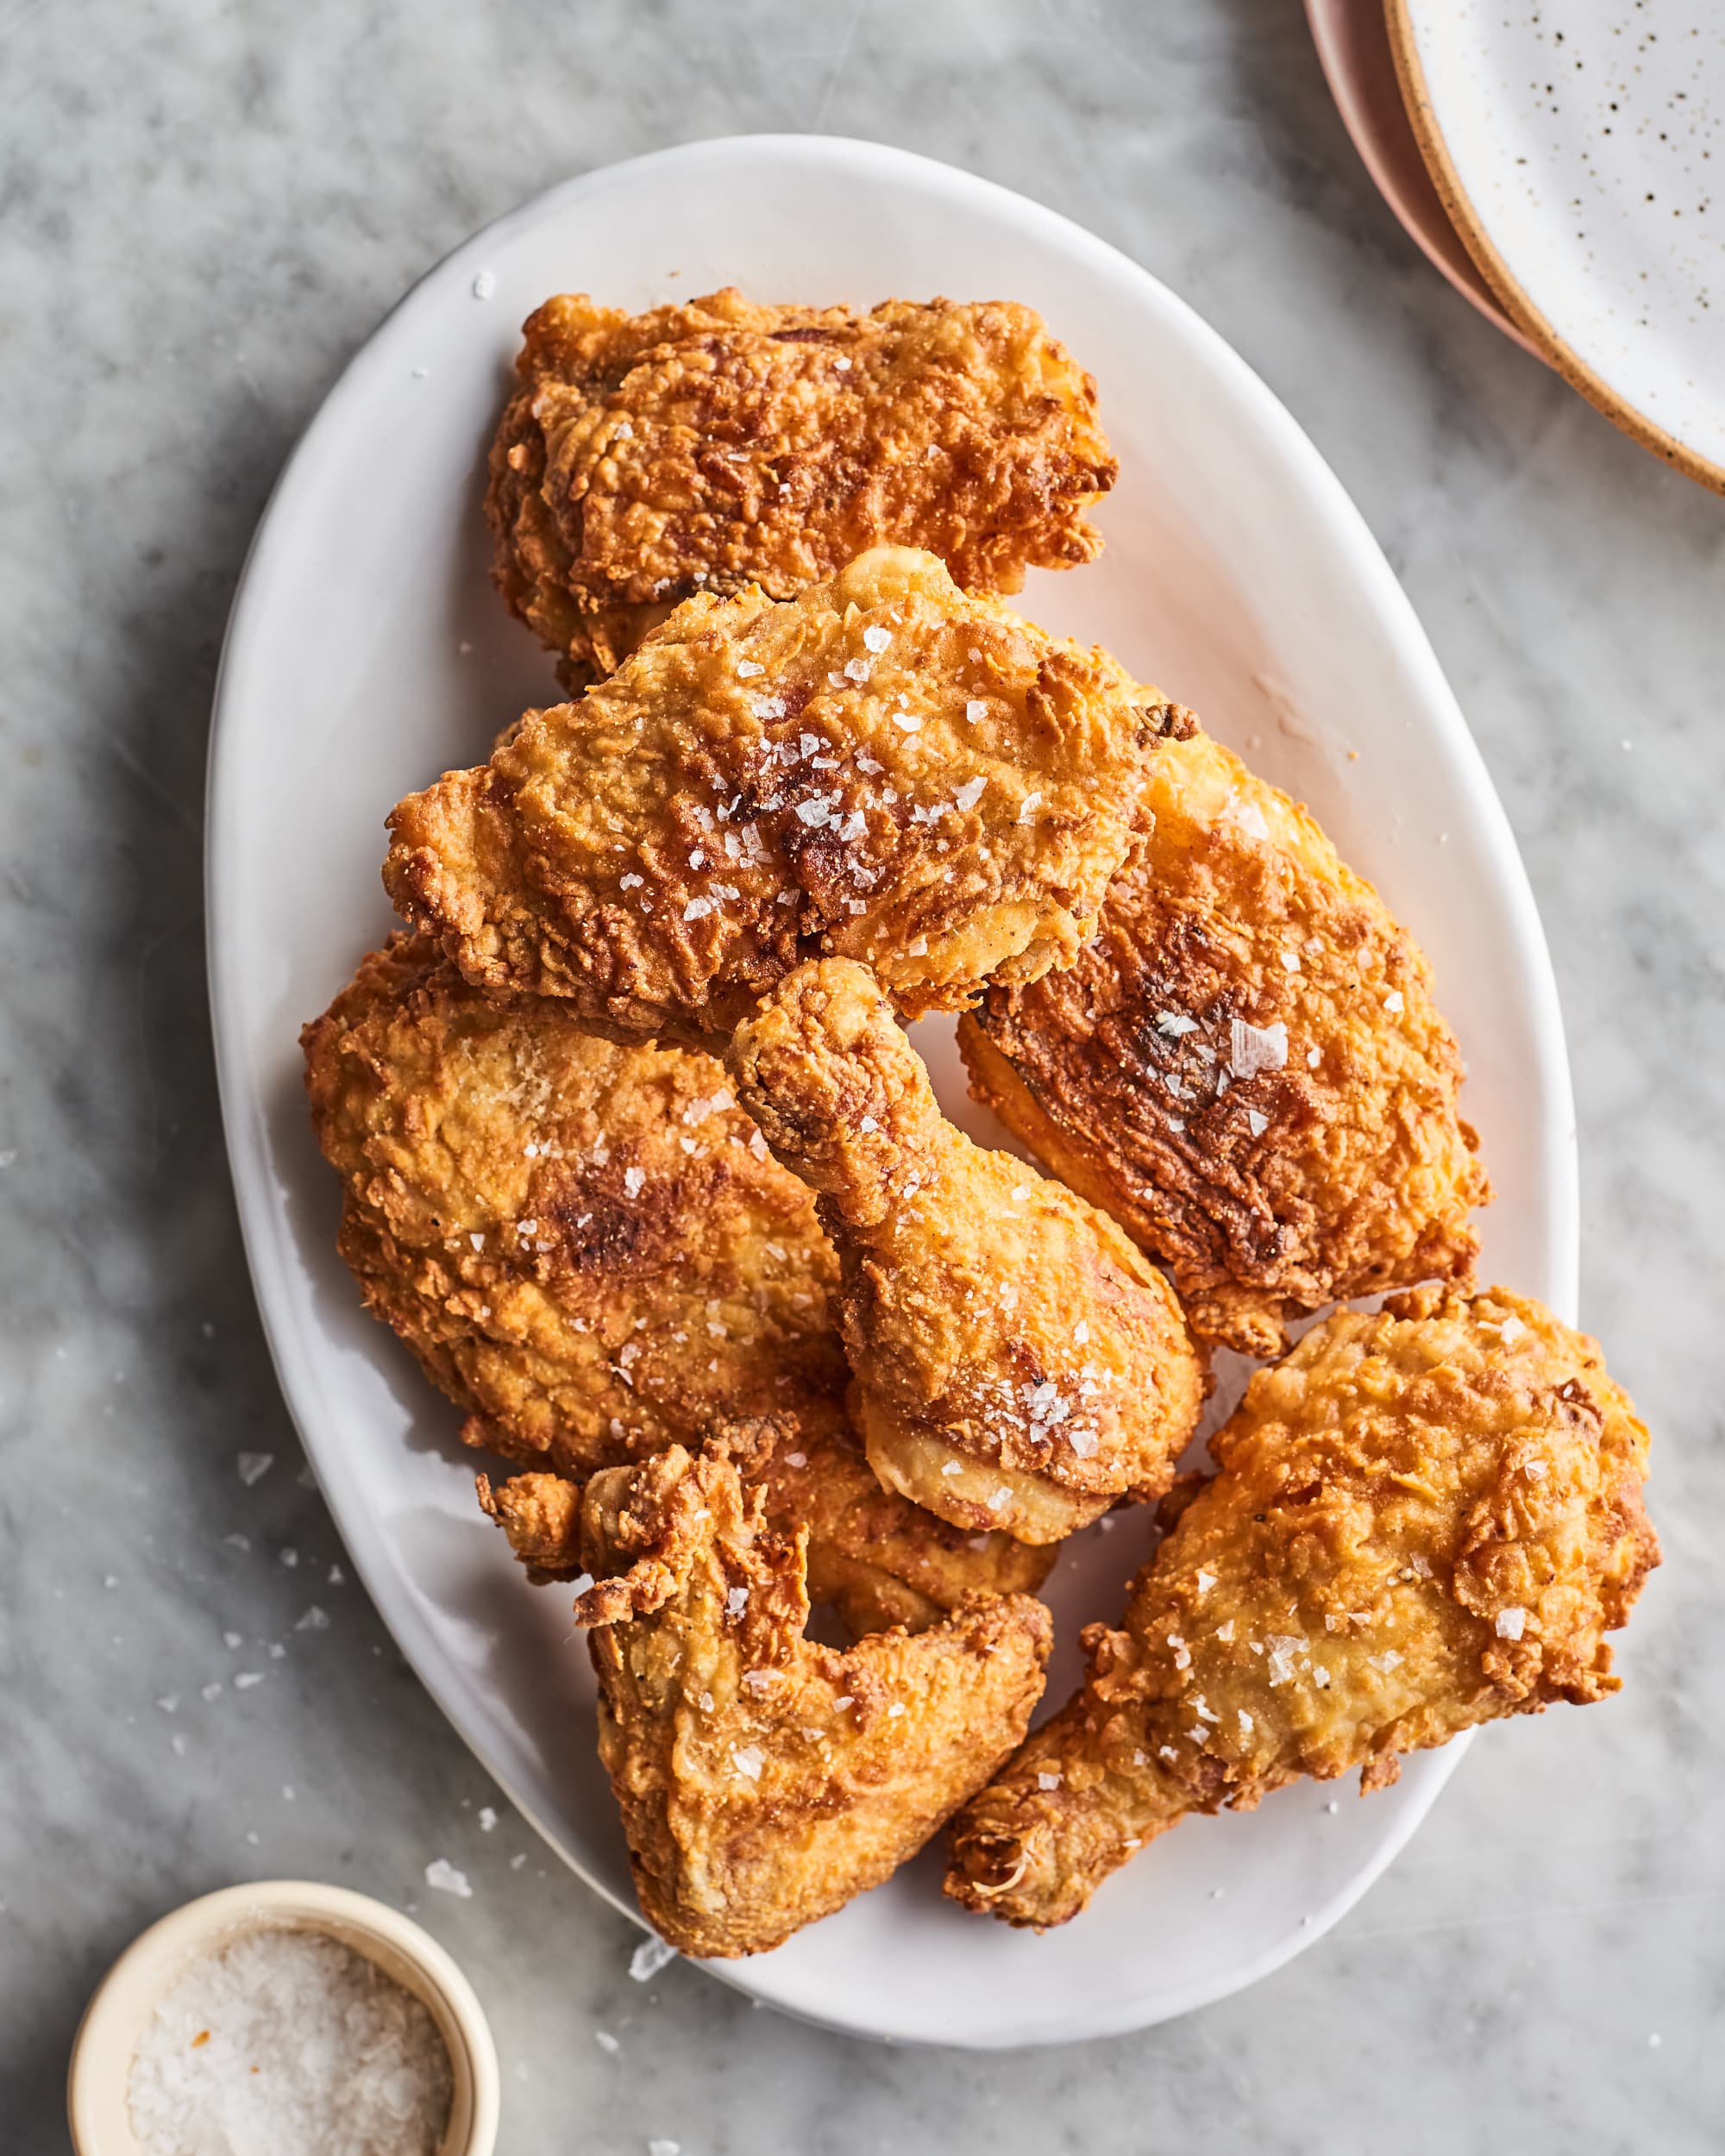 How to Reheat Fried Chicken So the Leftovers Stay Juicy and Crispy